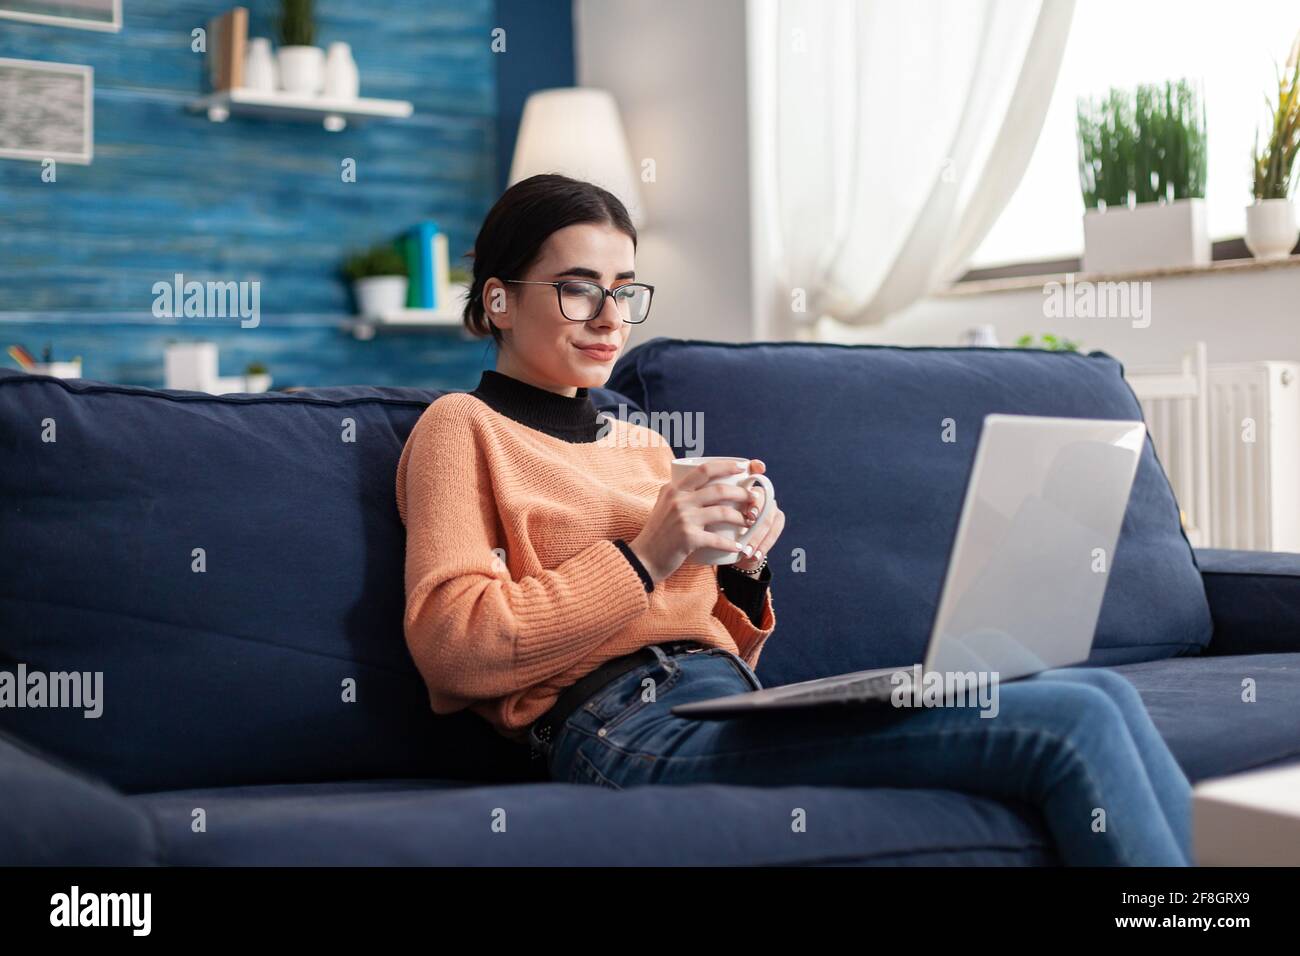 Student college learning management online lesson during univeristy seminar. Young woman sitting on sofa in living room checking e-learning platform using laptop computer Stock Photo